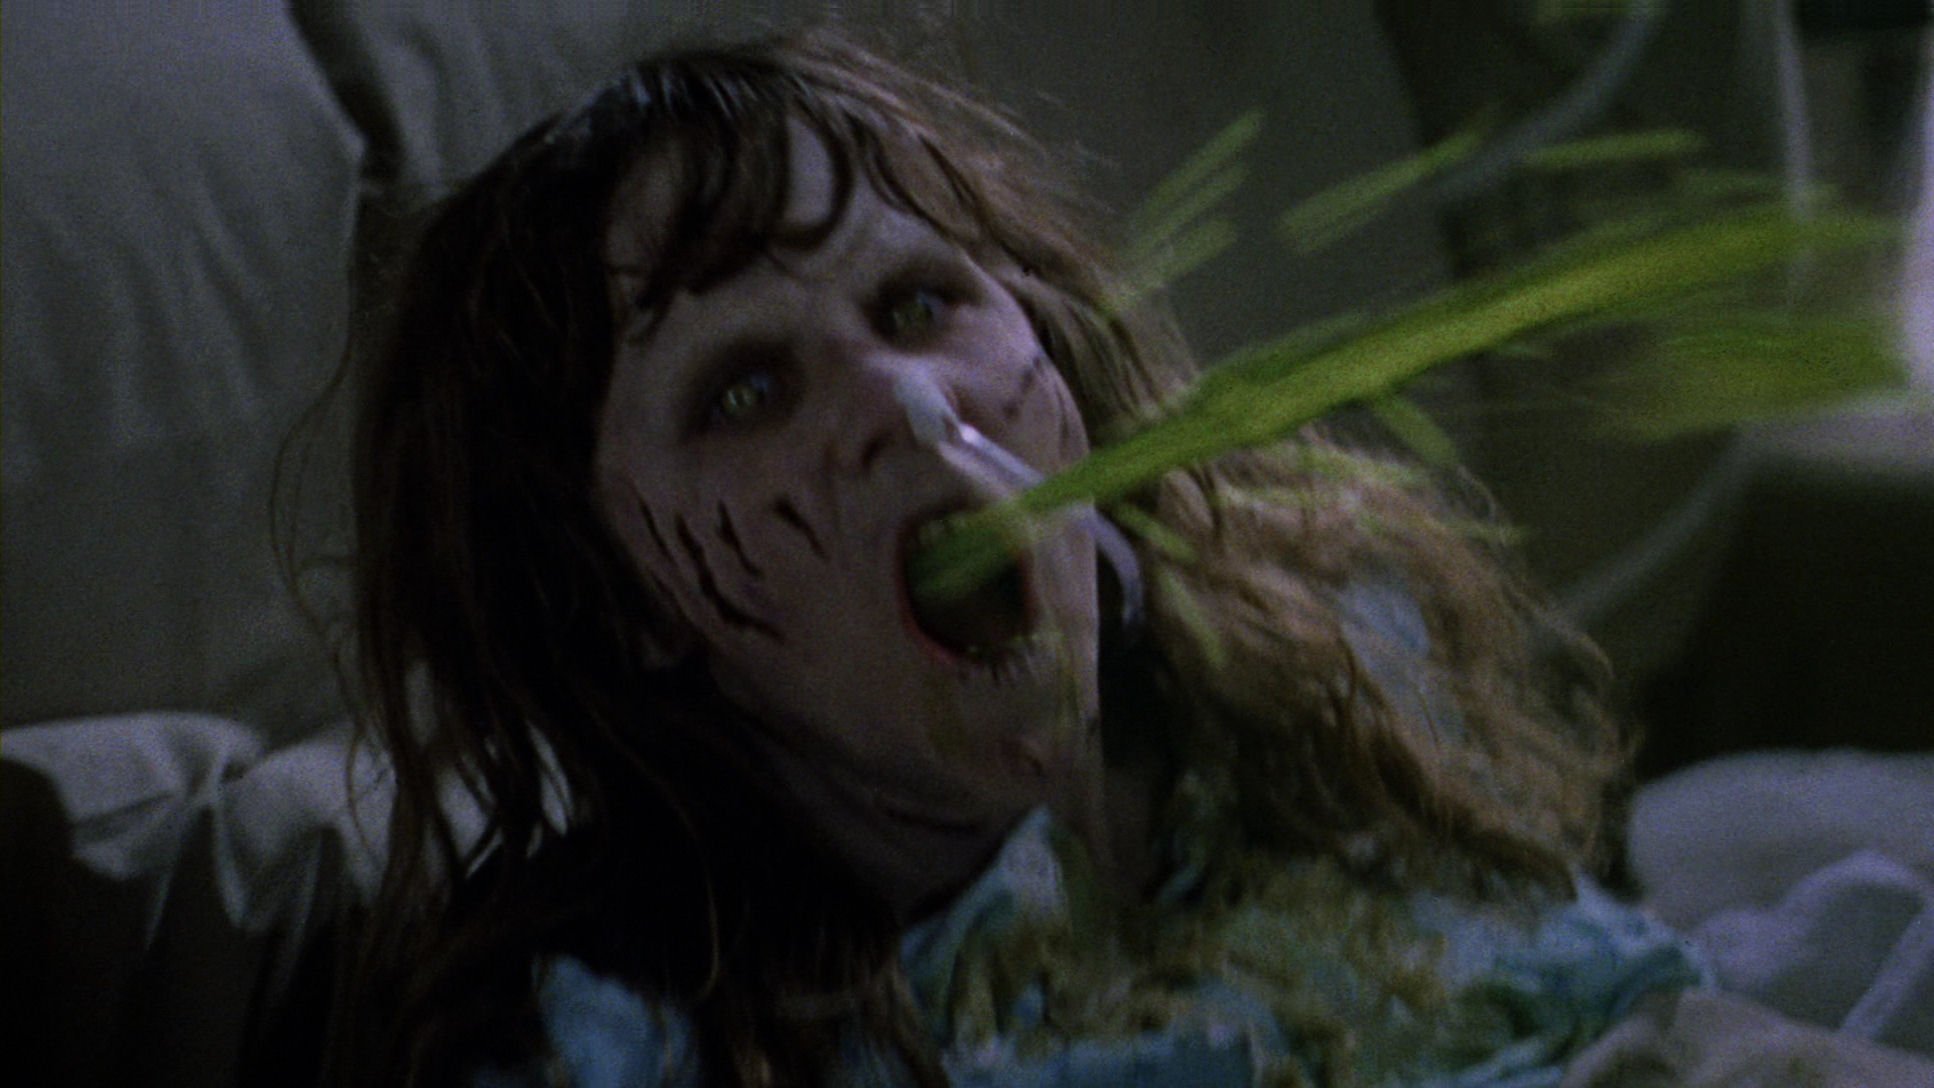 Pea soup: an unfortunate side-effect of Ouija board use. (The Exorcist/Warner Bros.)